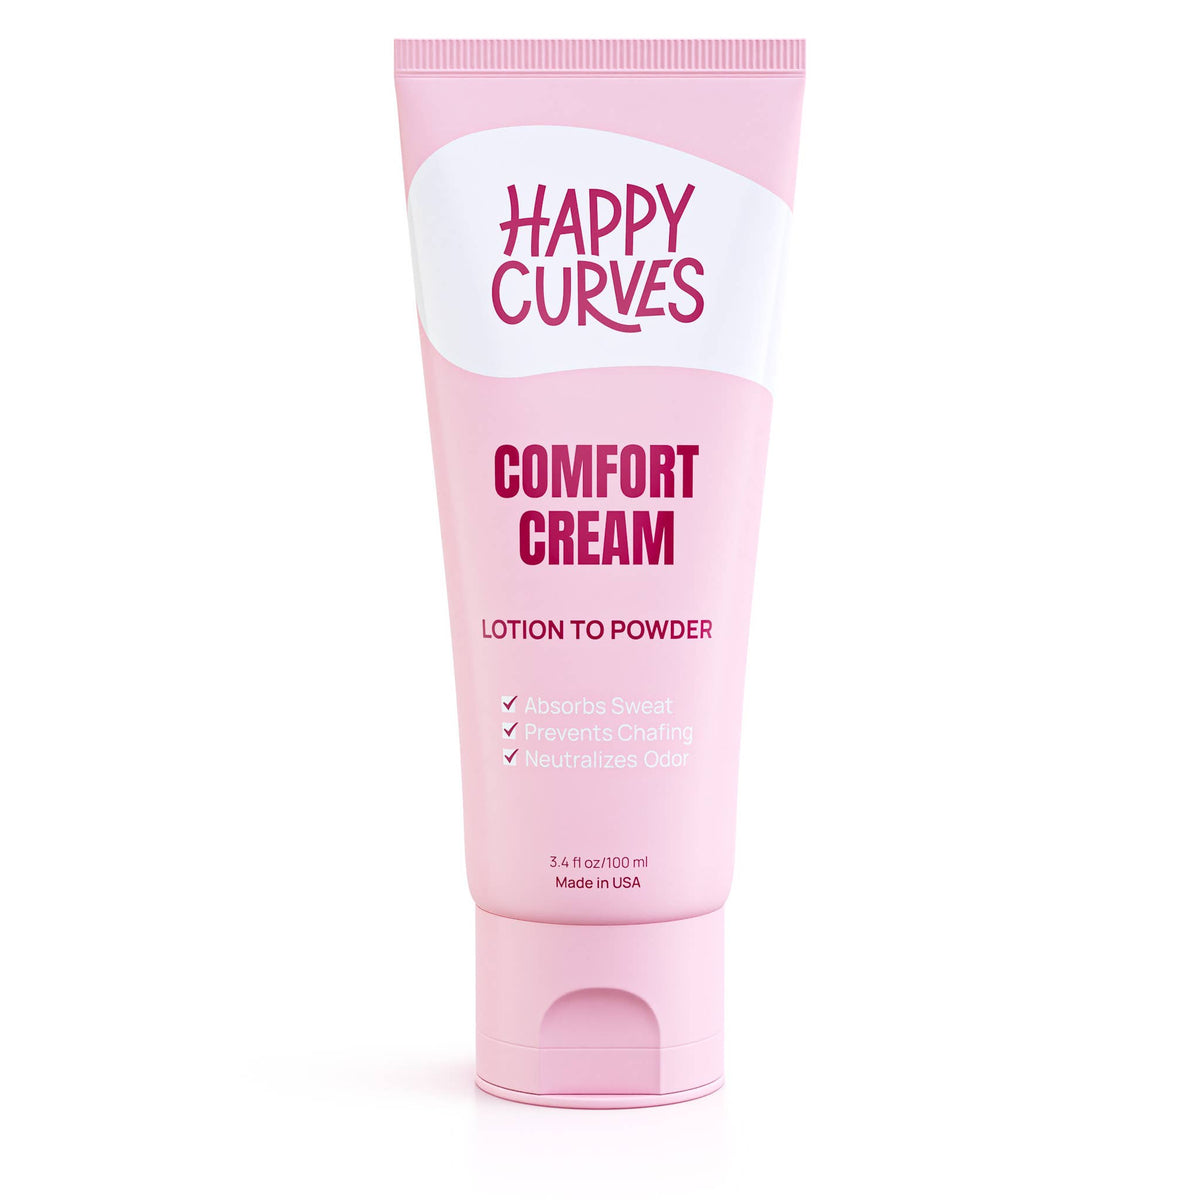 Comfort Cream - By Happy Curves®: Tropical